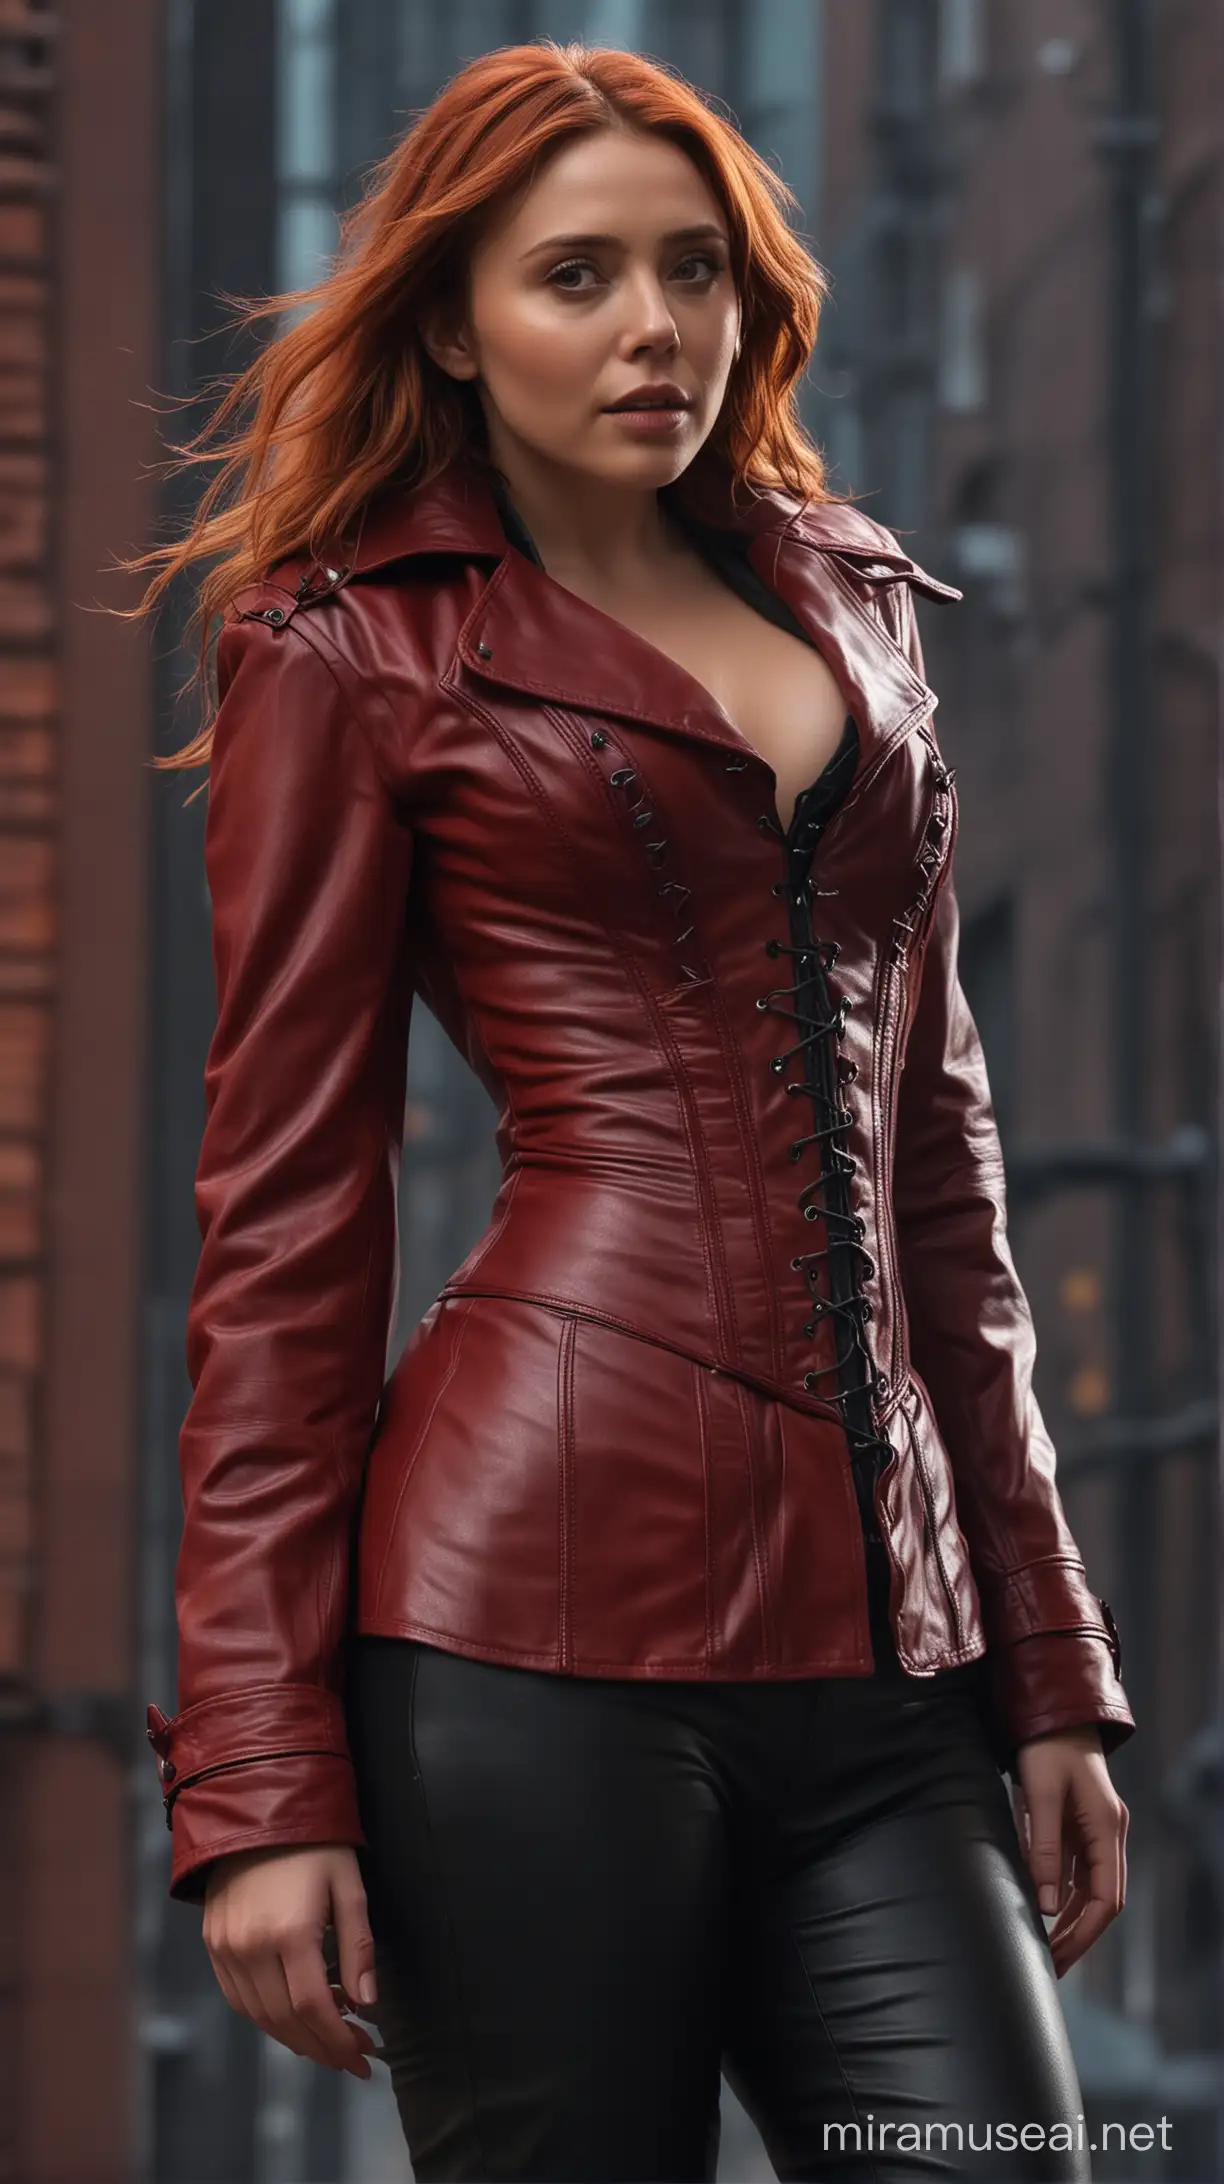 Elizabeth Olsen with red hair, in red leather corset and coat, black leather pants, high quality, detailed, realistic, cinematic, red color tones, dramatic lighting, urban setting, detailed facial features, professional, actress, vibrant, intense gaze, cinematic atmosphere